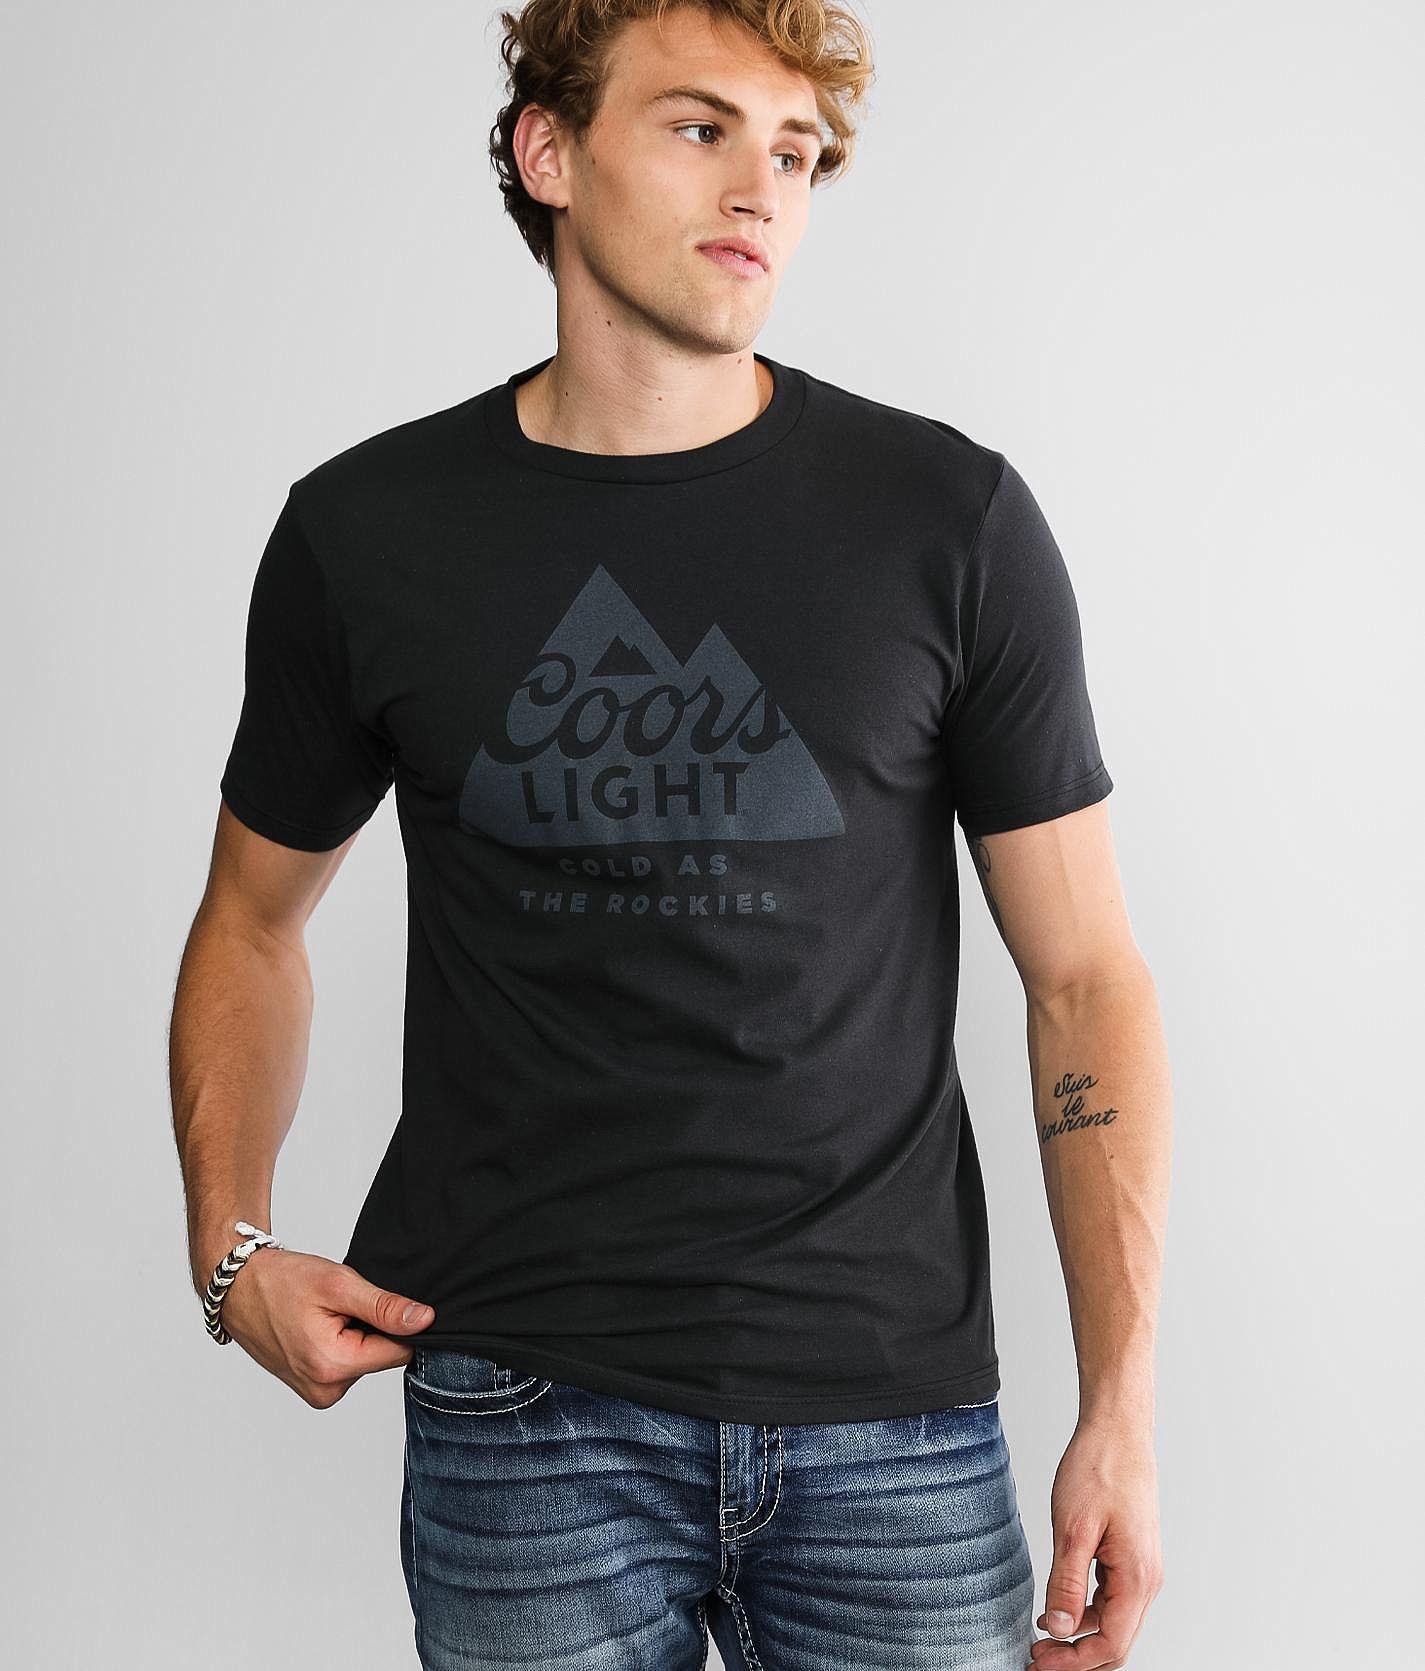 Coors Light Cold as the Rockies Beer T-Shirt - Charcoal Gray – Tee Luv